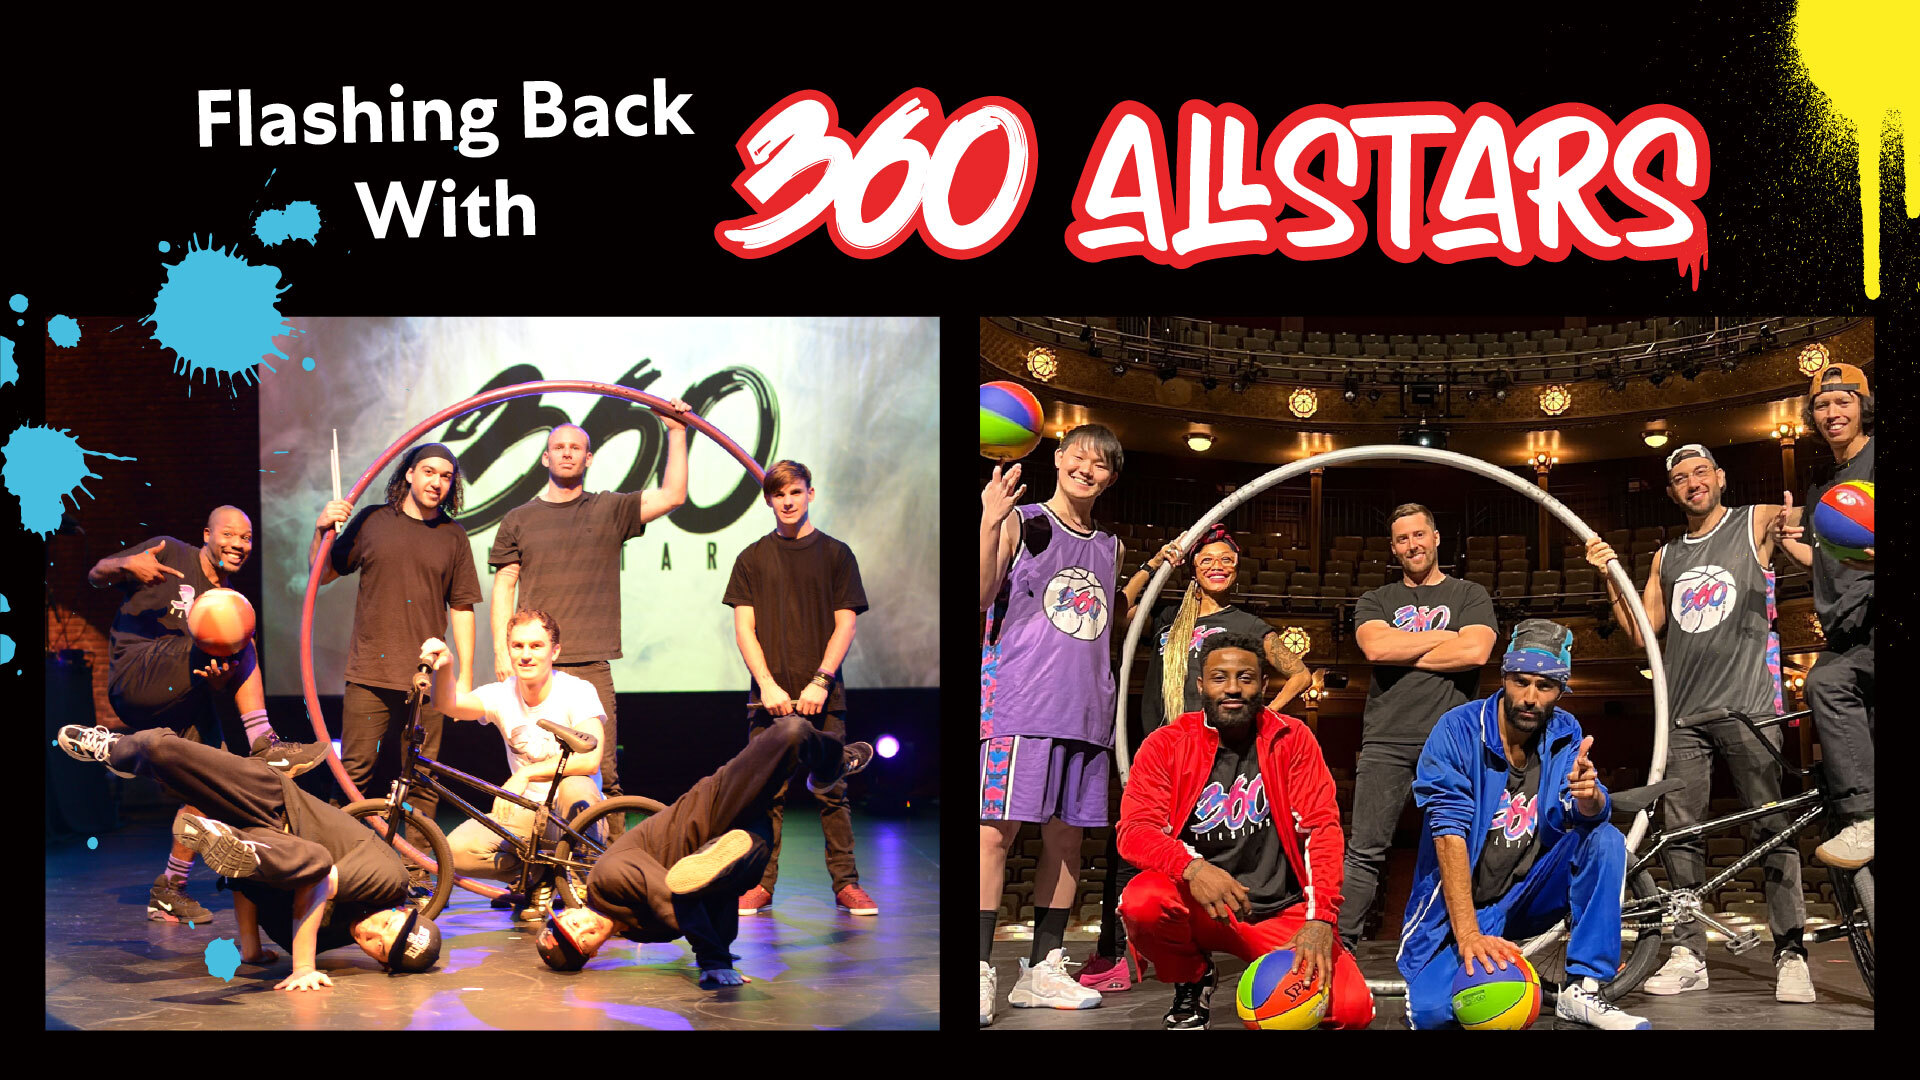 Header image that says "Flashing Back with 360 ALLSTARS" and has photos of the cast from 2014 and 2024